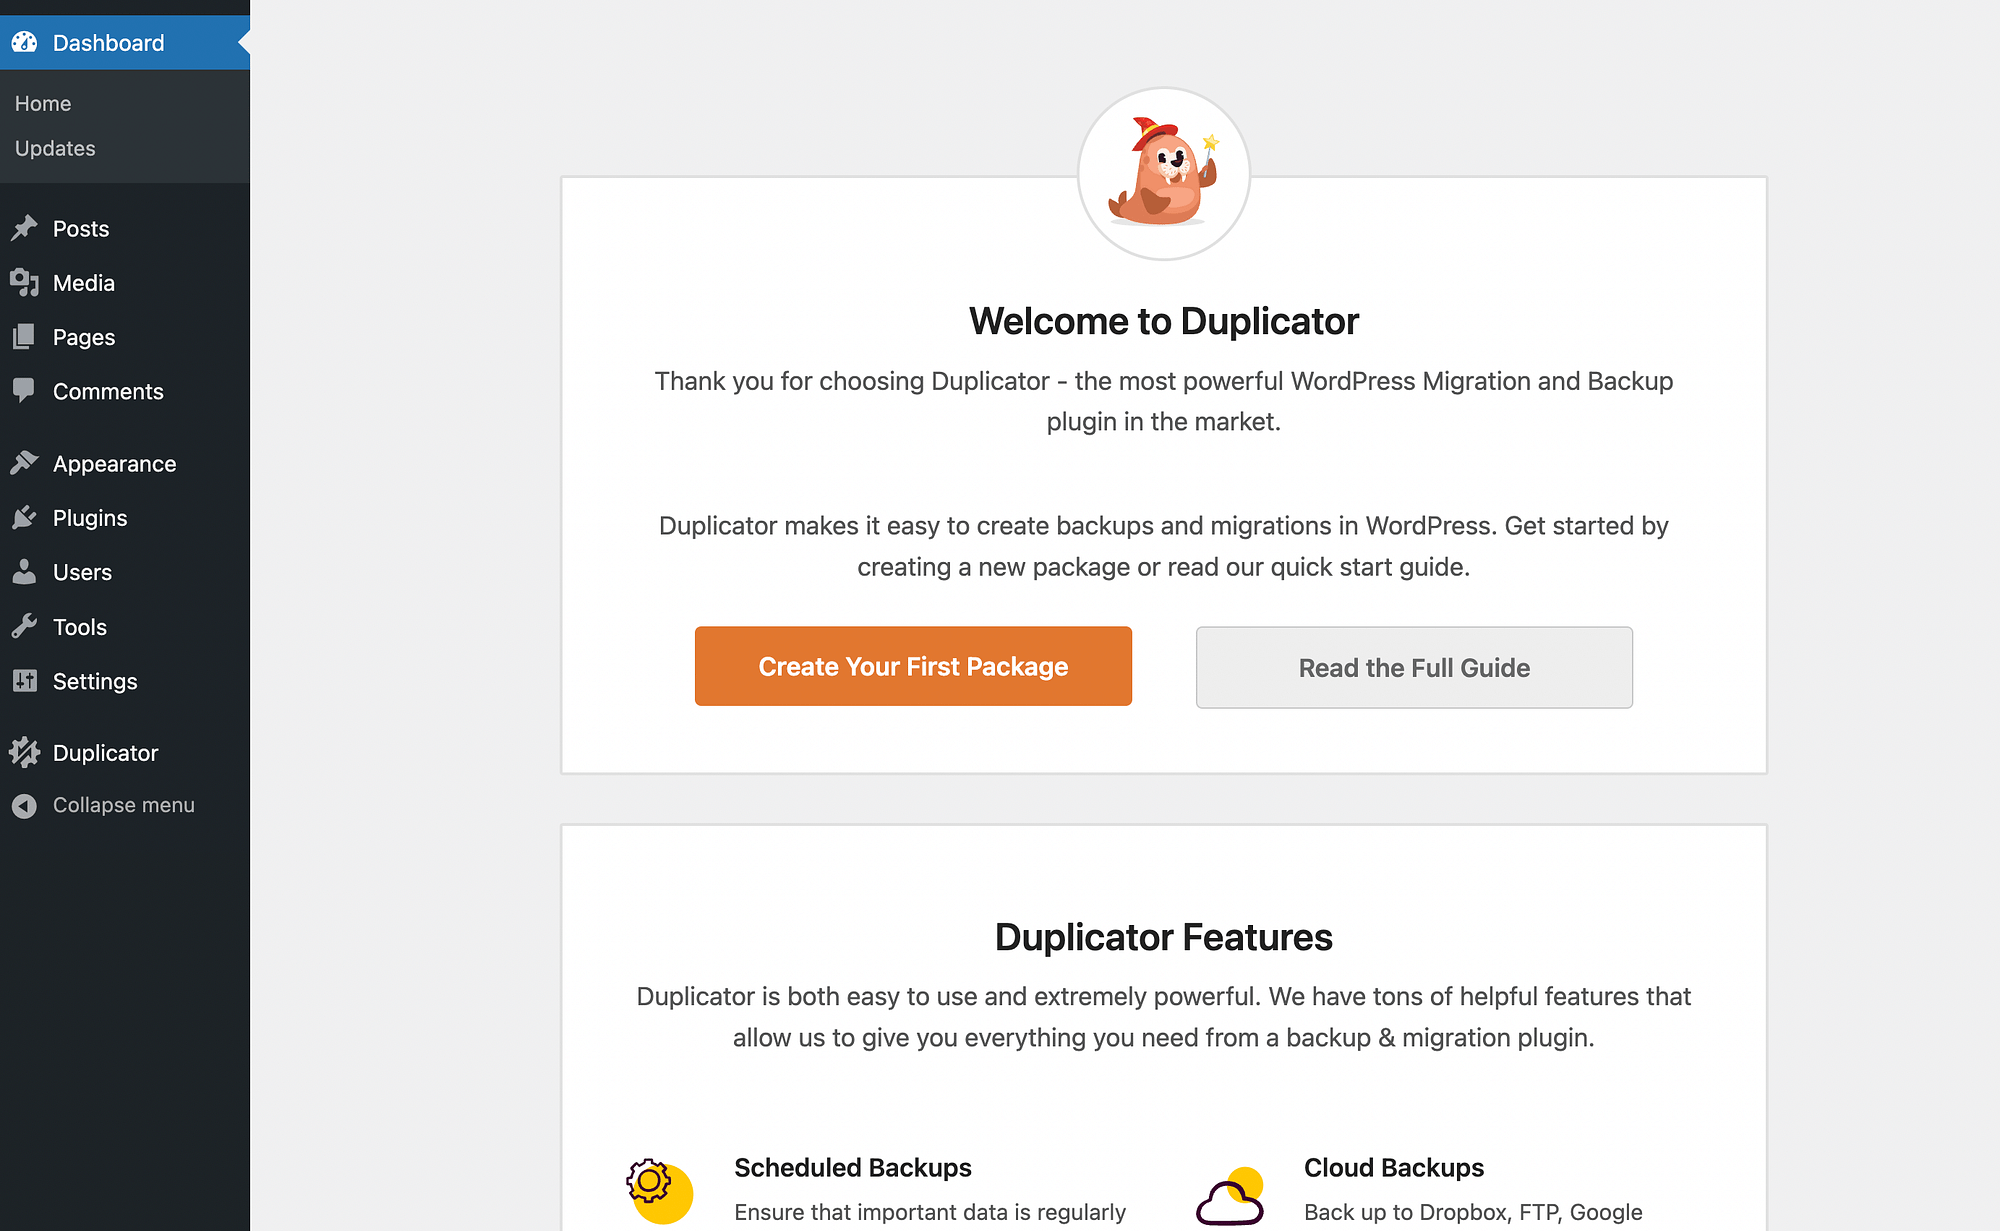 The "Welcome to Duplicator" screen.